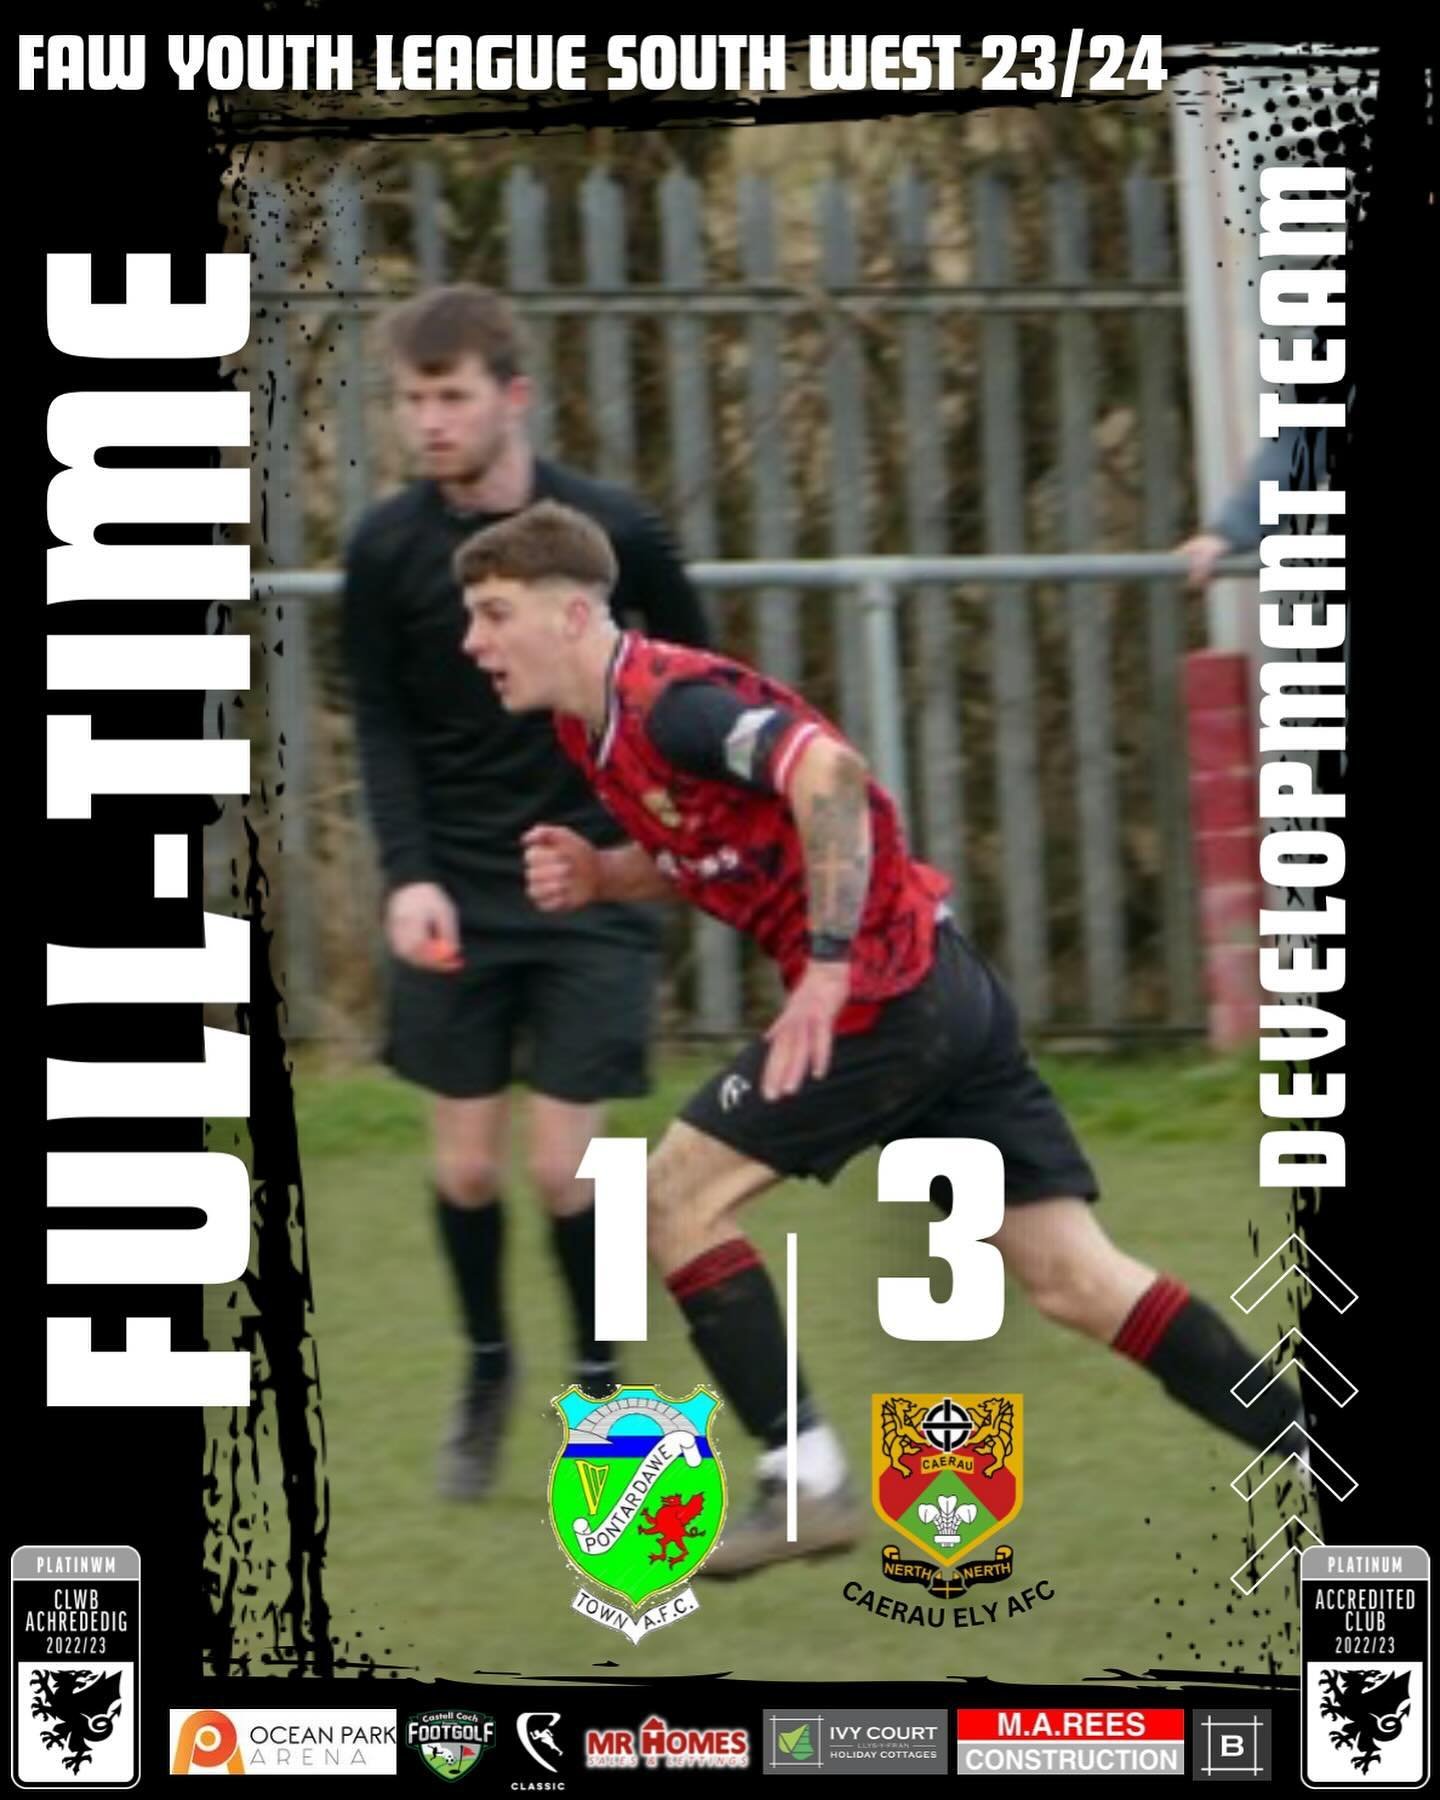 Our Development Team come away with 3 points today as they competed against @trefpontardawe 
A tough away fixture with the opposition not giving up until the final whistle.
#youngguns #whereyoubelong